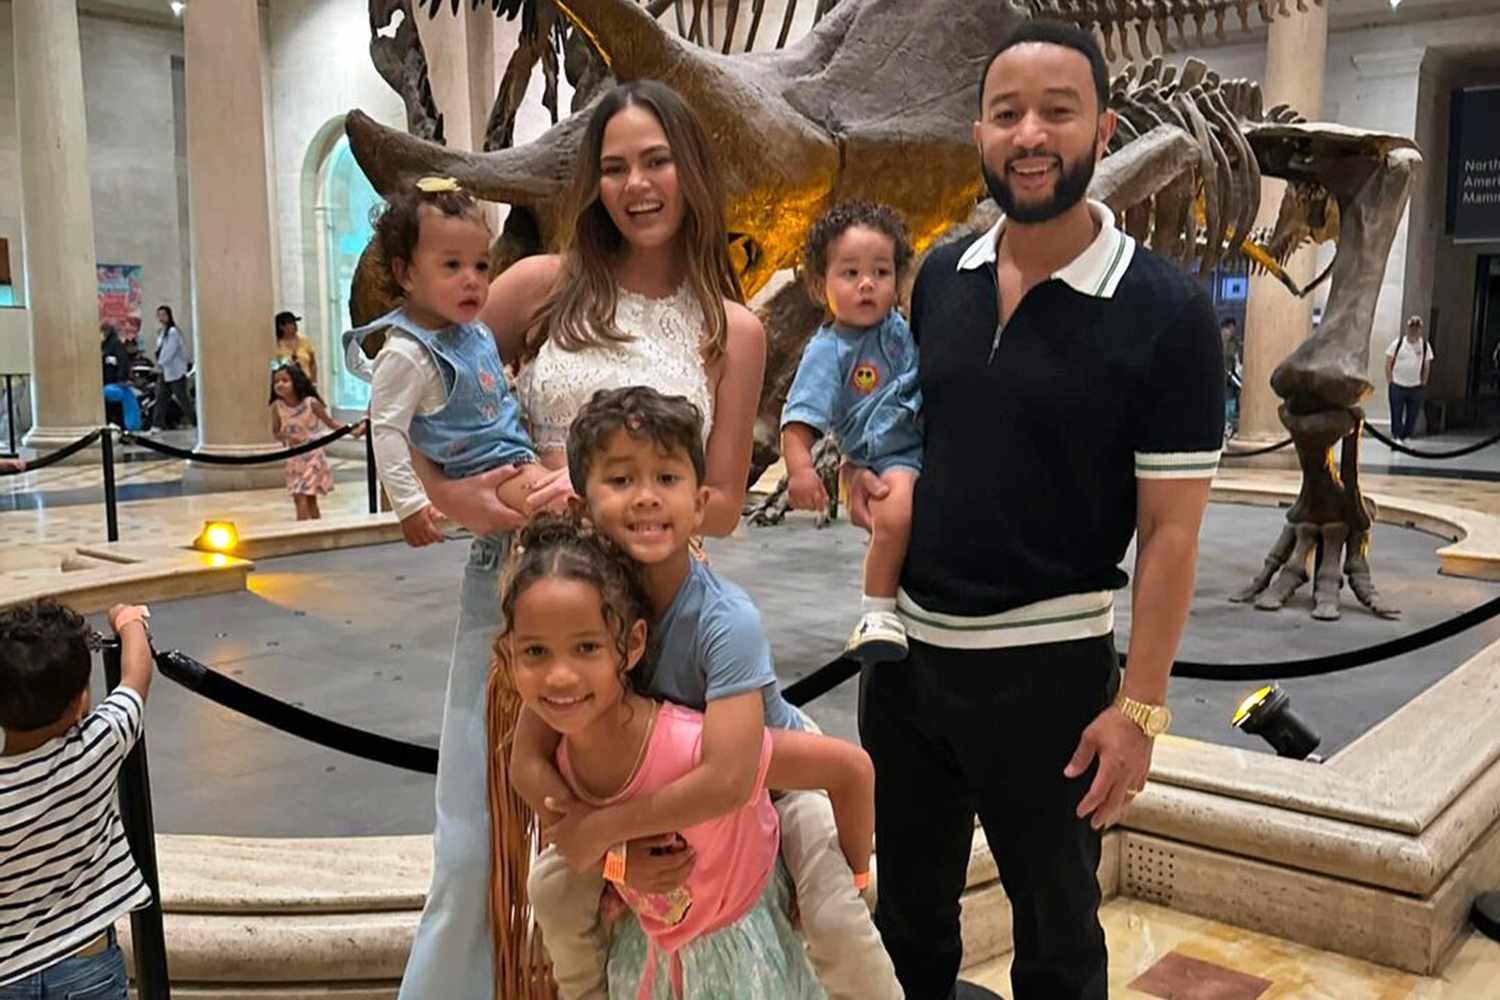 Chrissy Teigen Shares Snaps of ‘Beautiful, Chaotic’ Museum Trip with John Legend and Their Kids